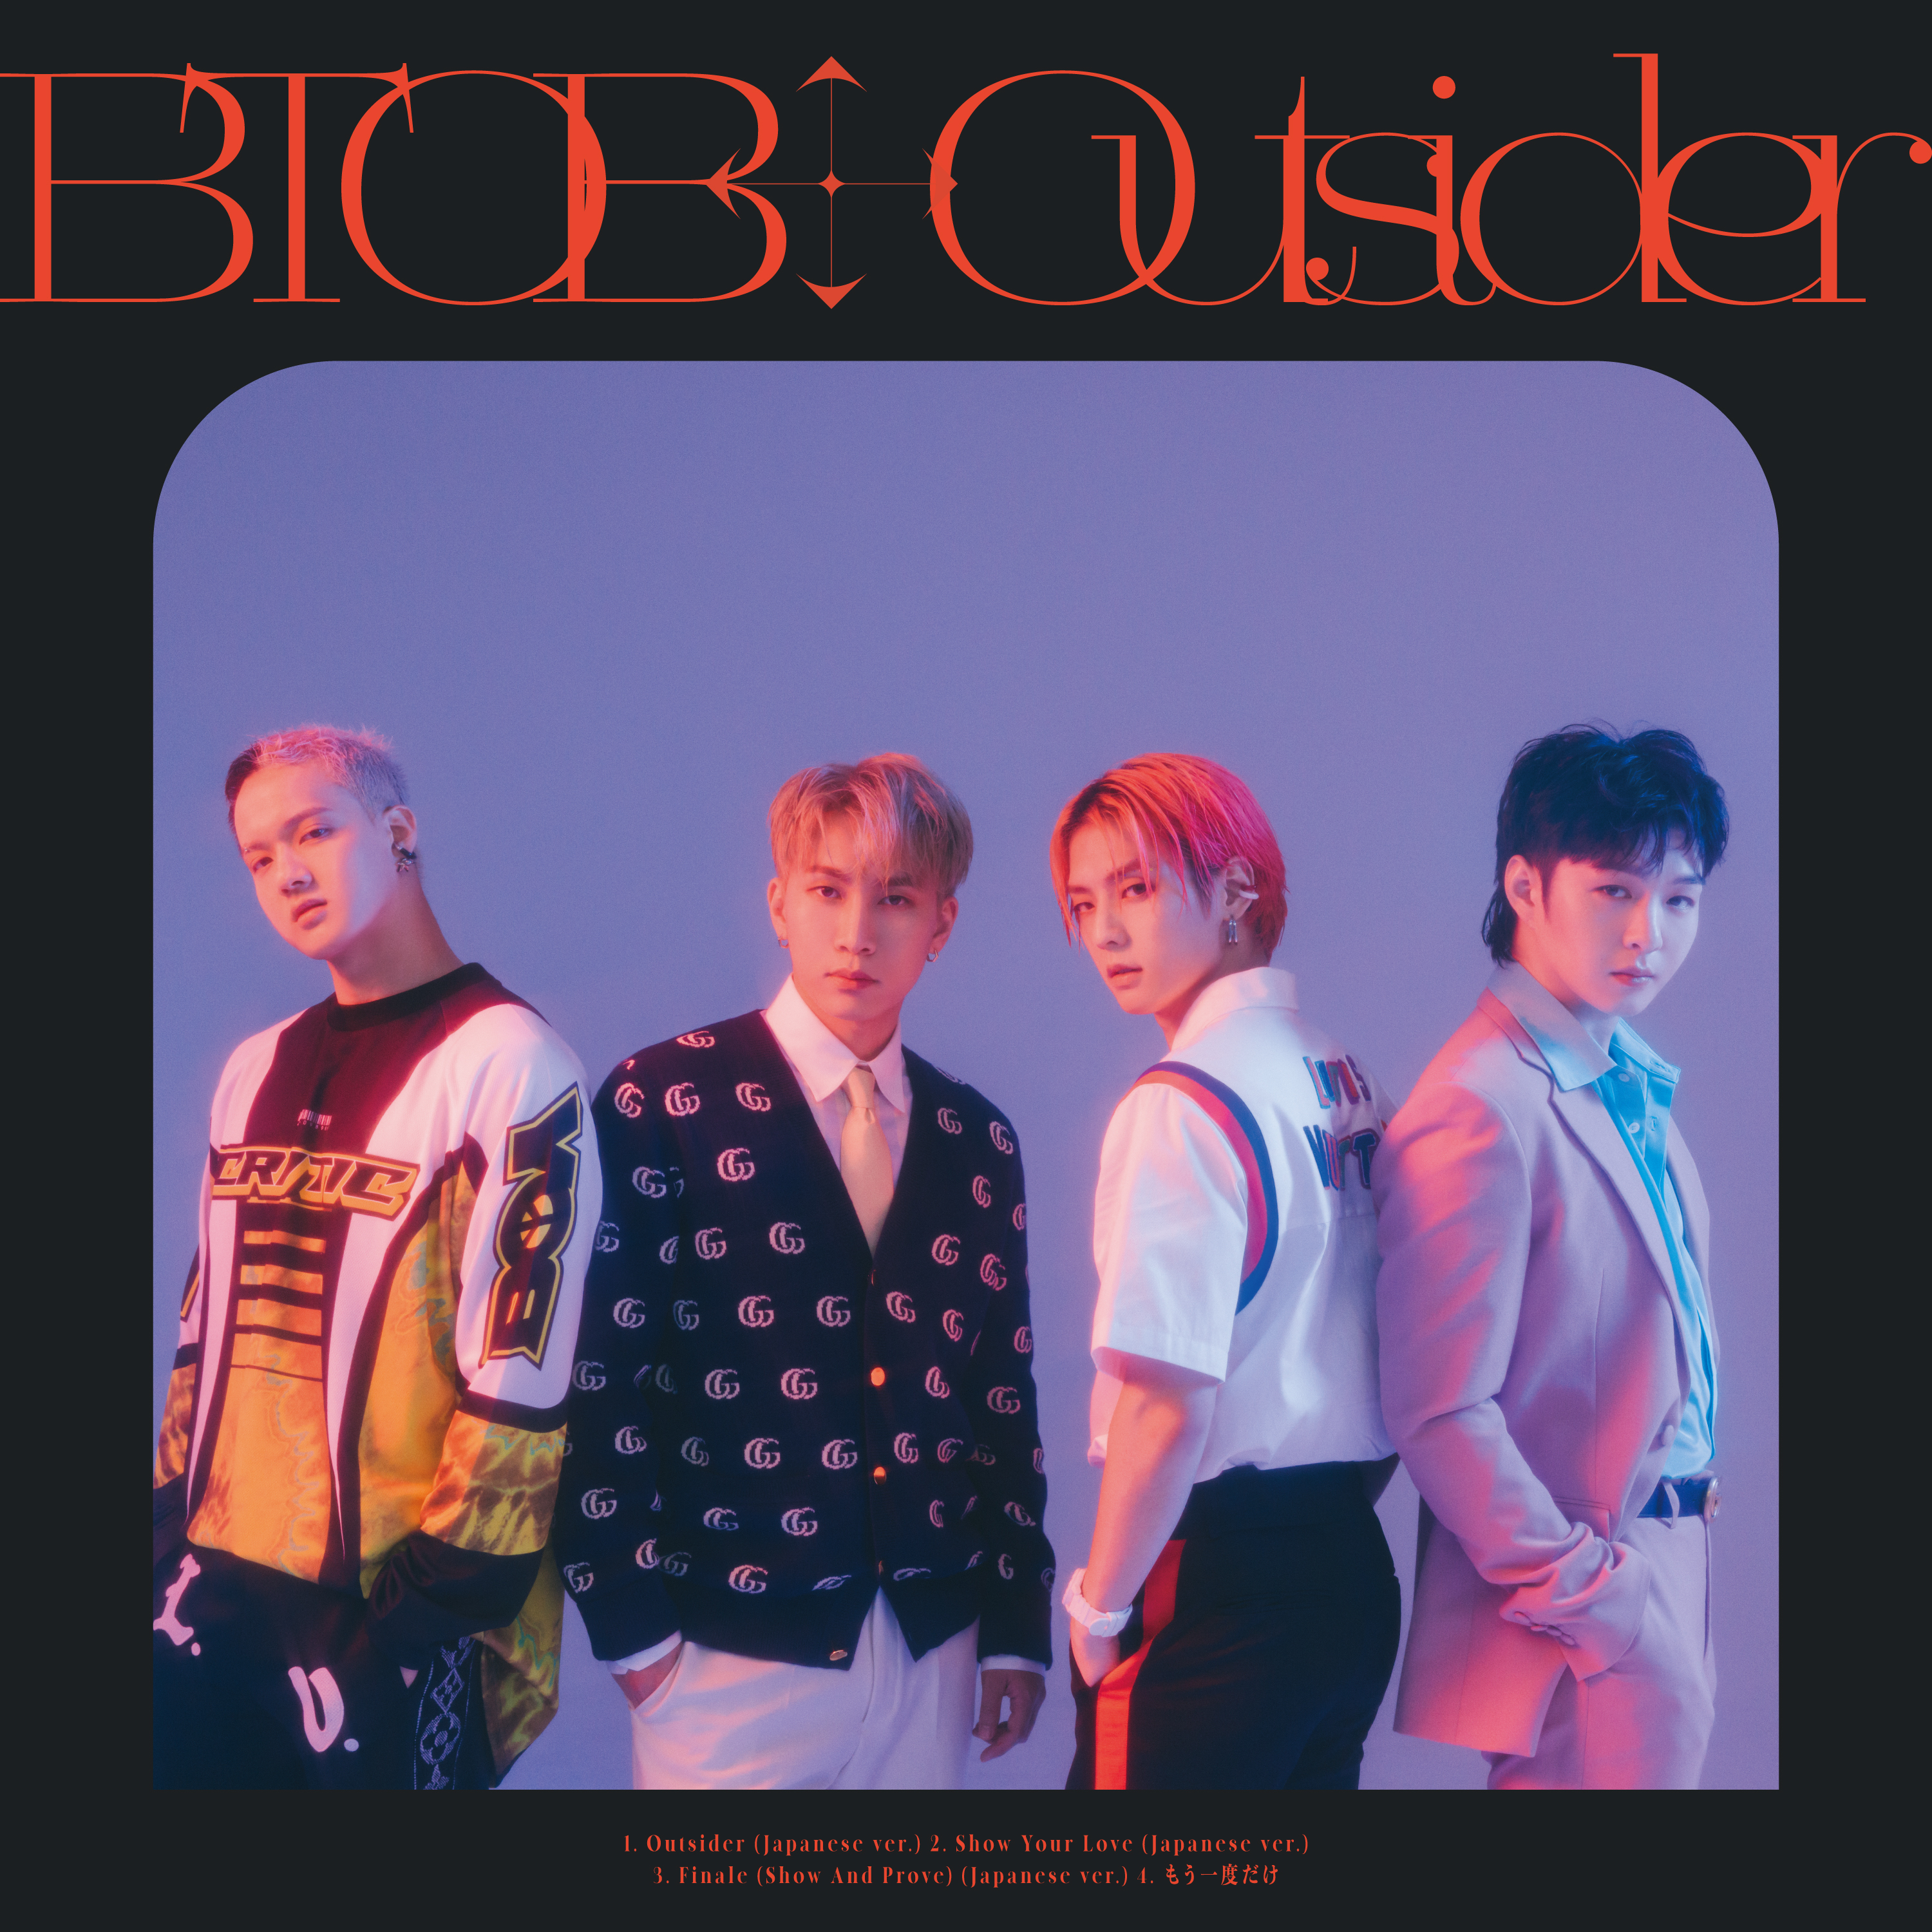 Finale (Show And Prove) (Japanese ver.)歌词 歌手BTOB-专辑Outsider-单曲《Finale (Show And Prove) (Japanese ver.)》LRC歌词下载